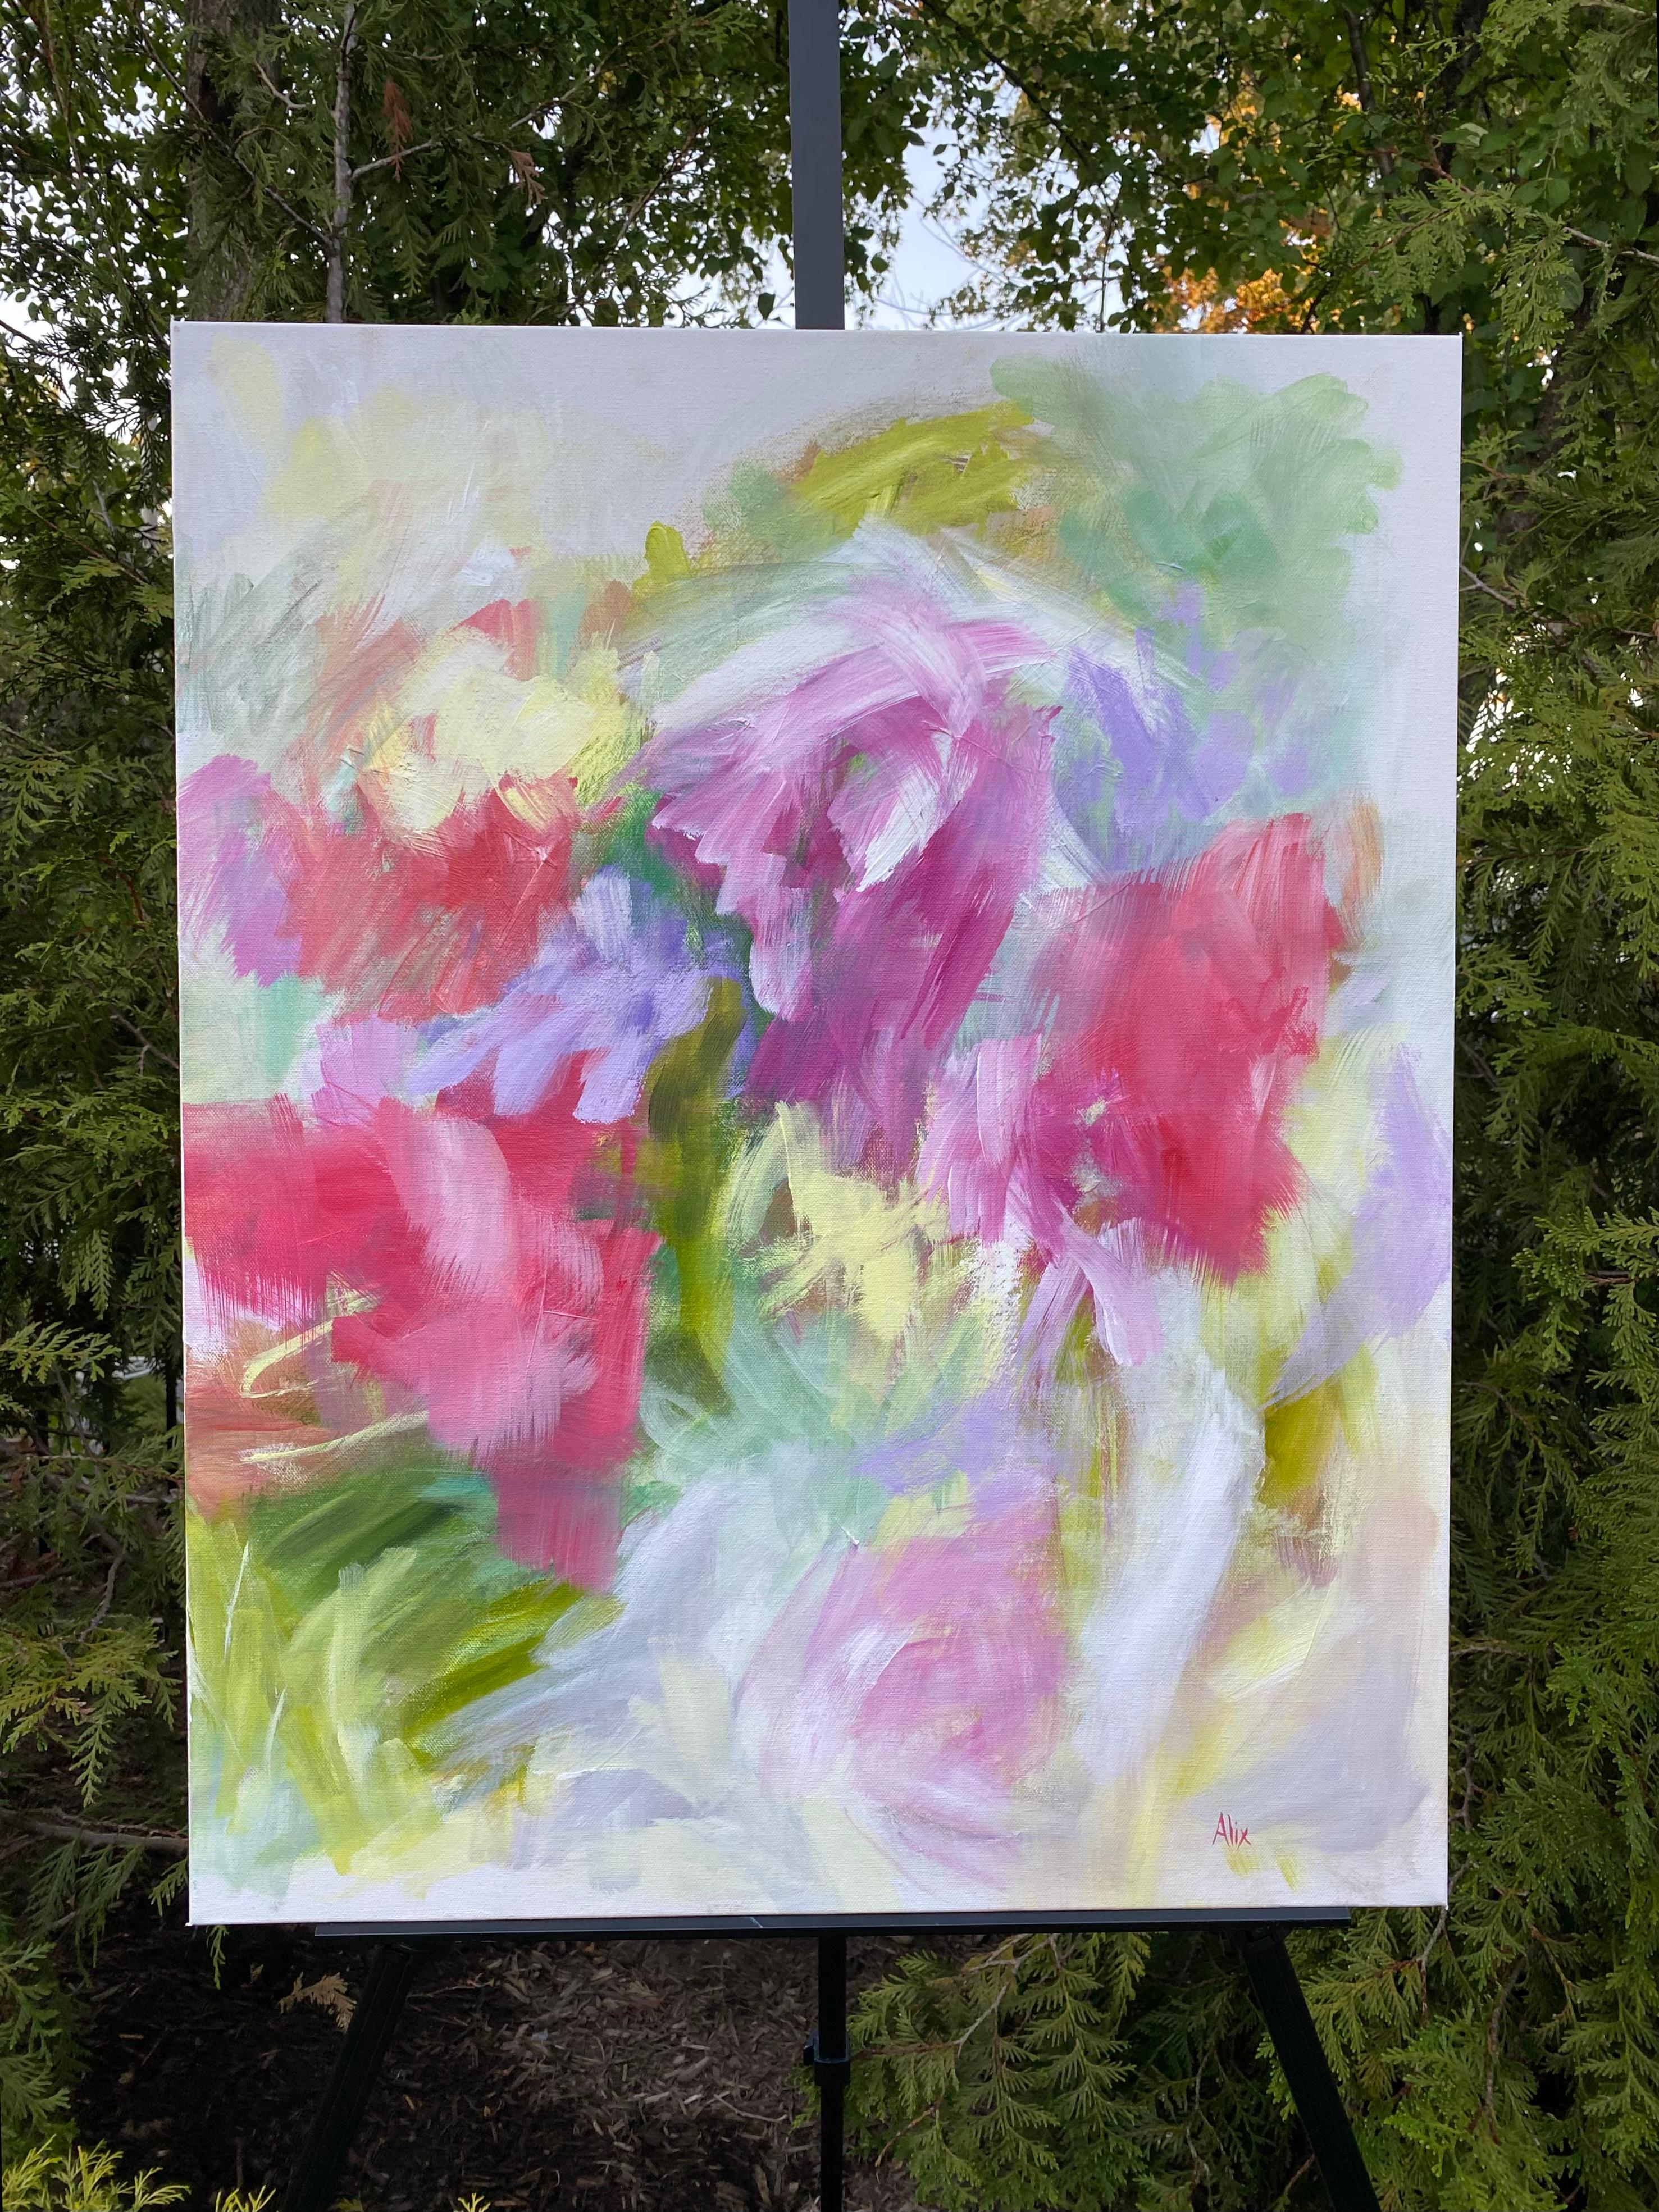 <p>Artist Comments<br>Artist Alix Palo presents an abstract portrayal of a soothing garden scene. The symphony of red, green, and violet burst into a blooming display of nature. The interplay of expressive lines and markings mirrors the loose and